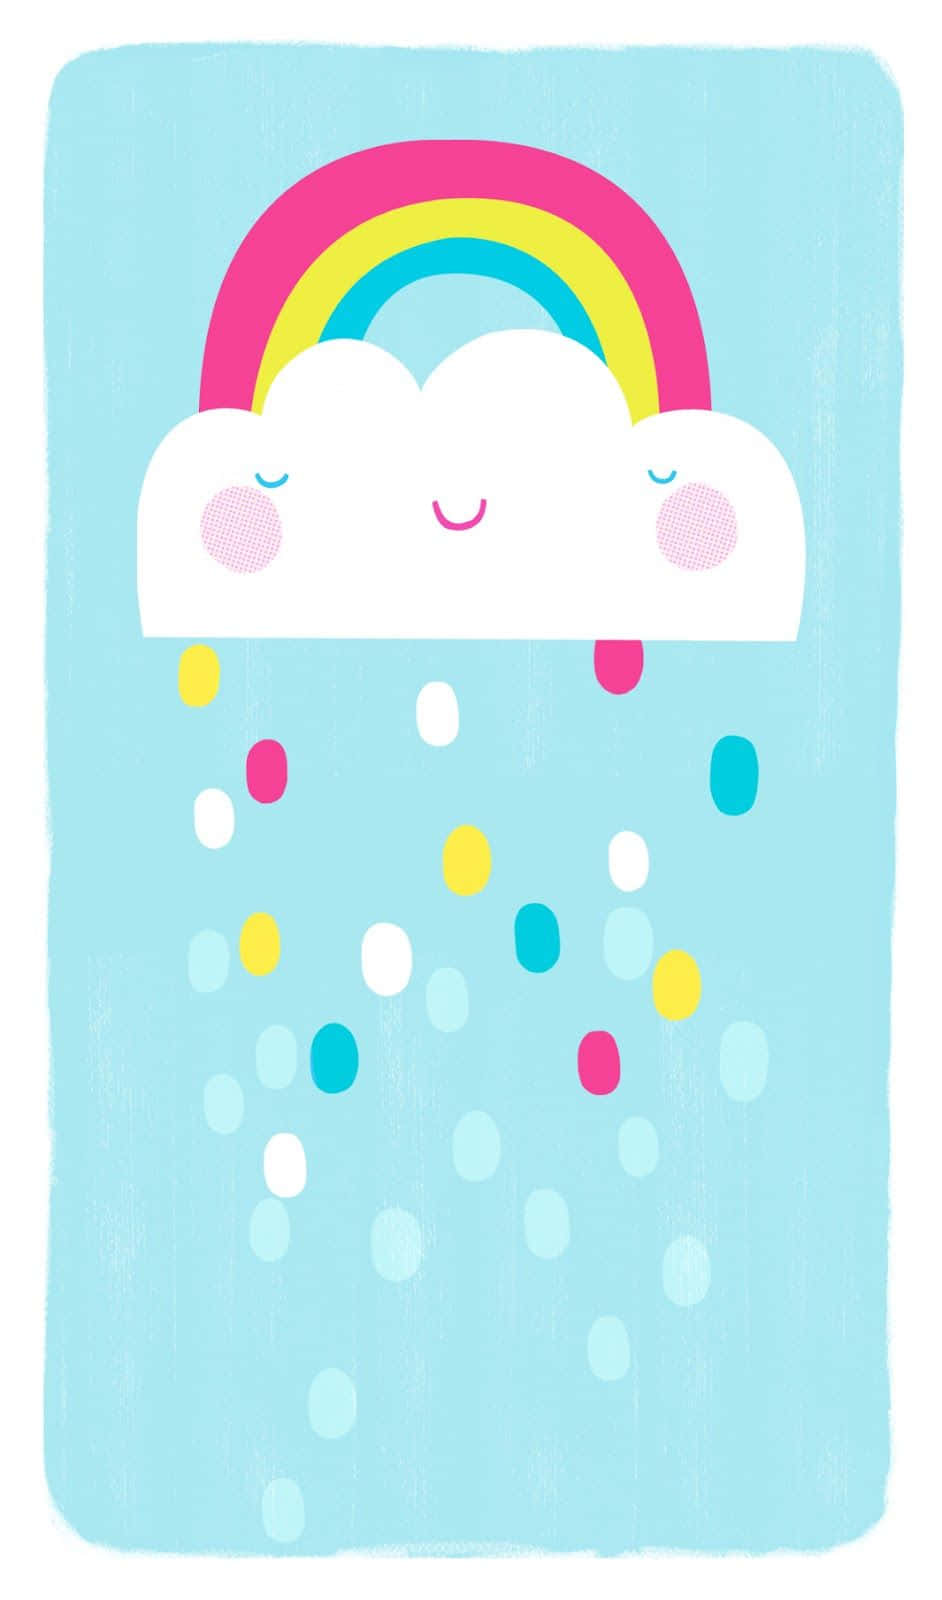 Adorable Kawaii Rainbow spreading happiness and magic in a pastel sky Wallpaper